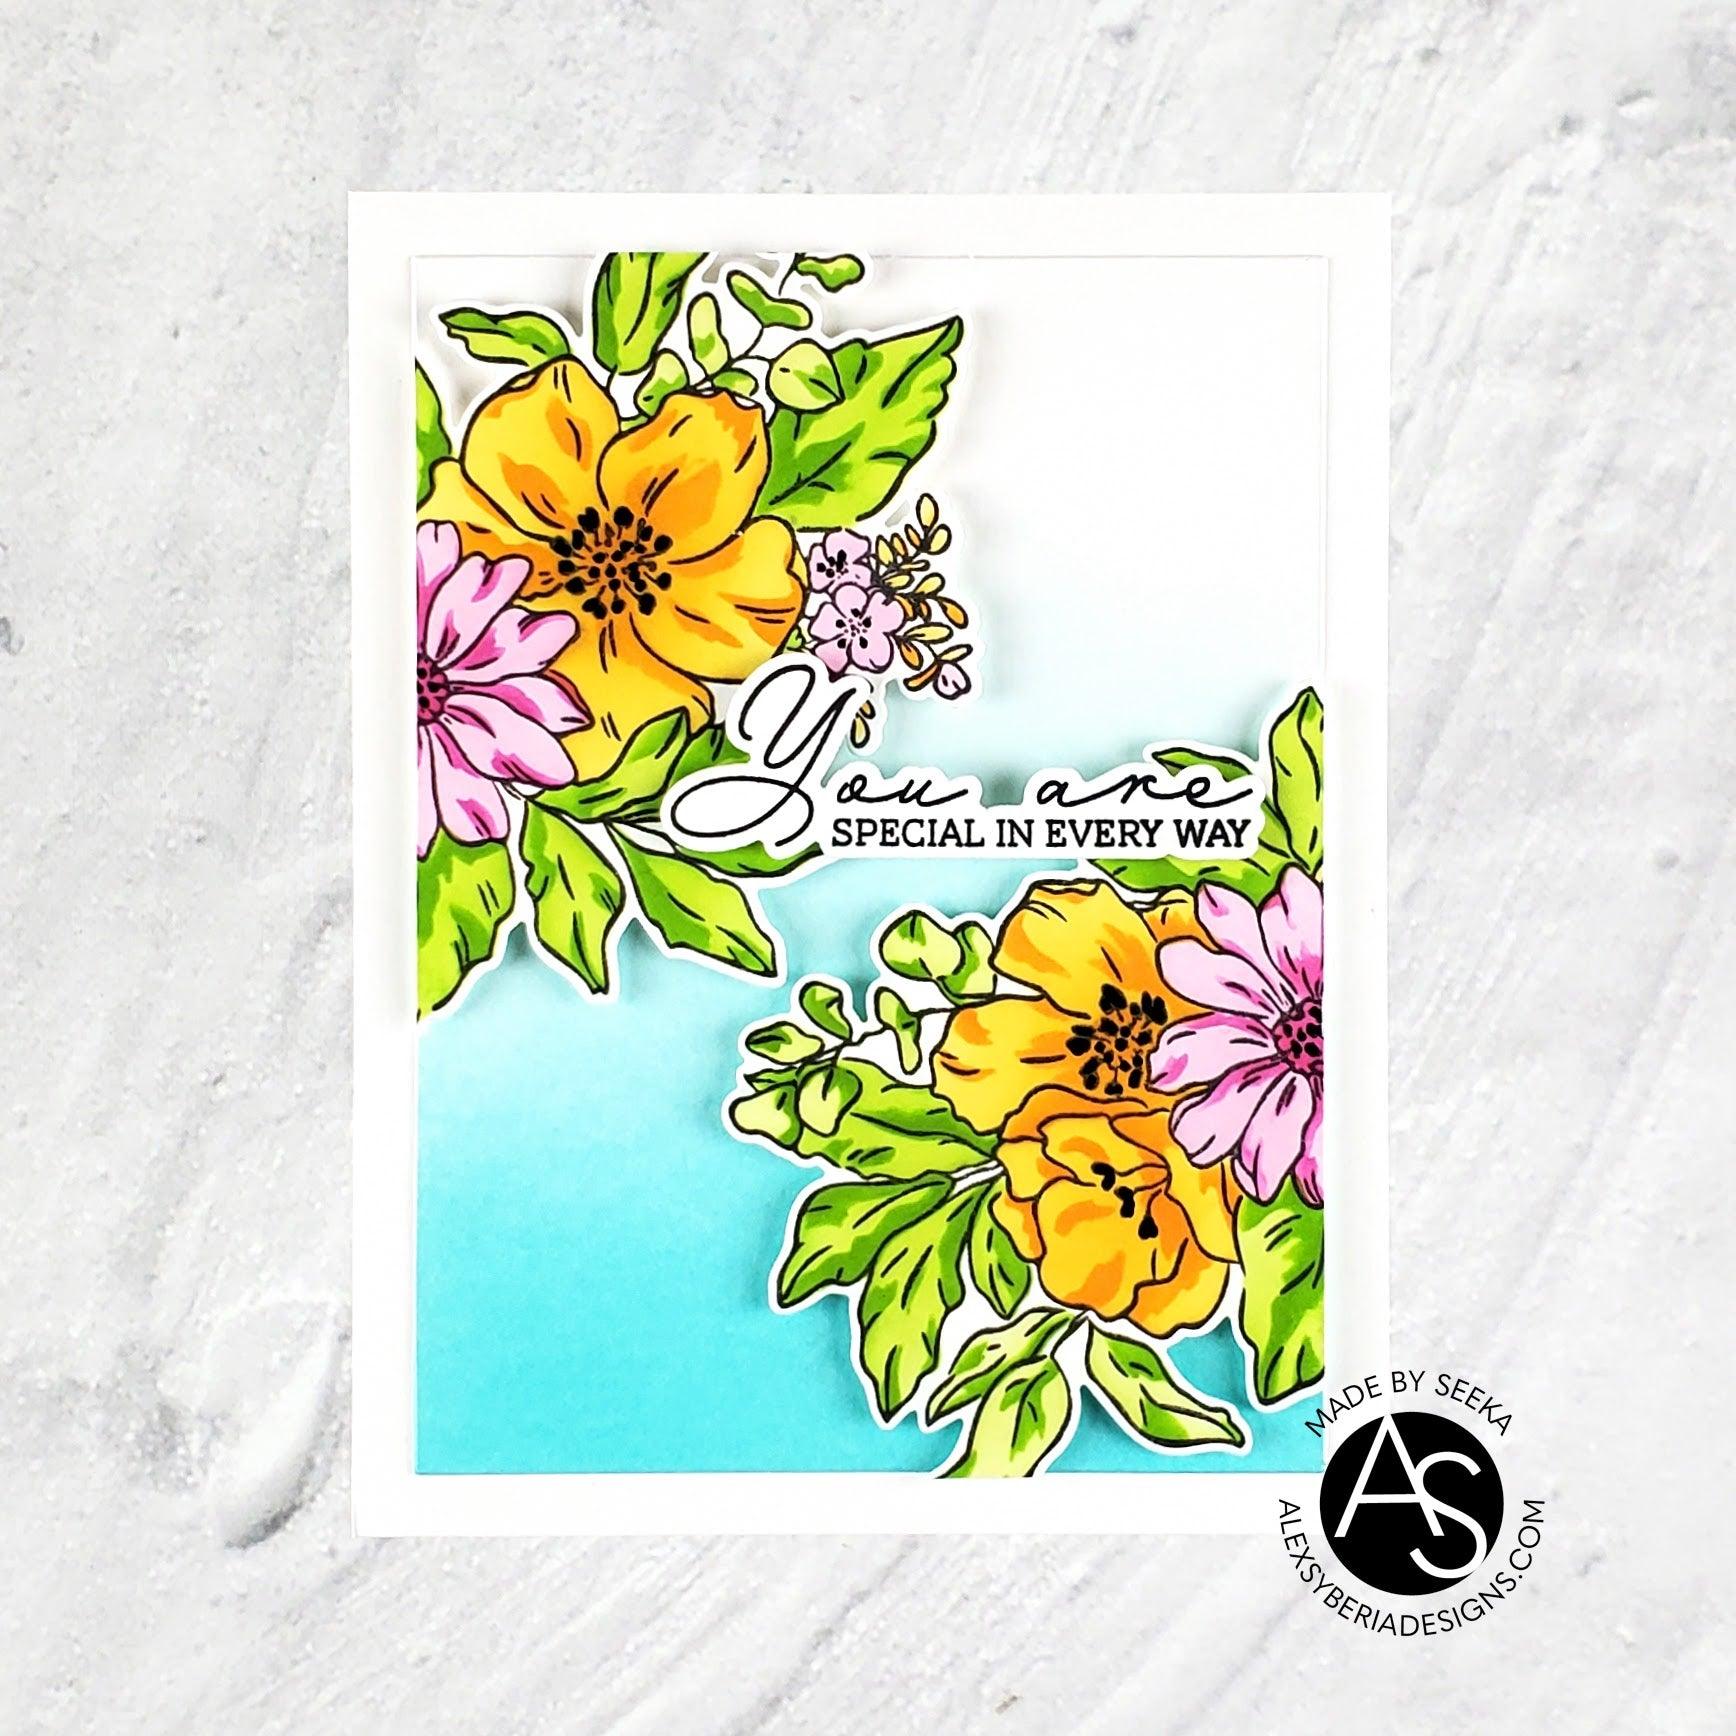 life-is-good-stamp-set-alex-syberia-designs-bouquet-coloring-cardmaking-tutorial-floral-card-famous-cardmaking-brands-copic-coloring-handmadecards-stencils-embossing-ink-blending-die-cutting-cardmaking-tutorials-famous-brands-simon-says-stamp